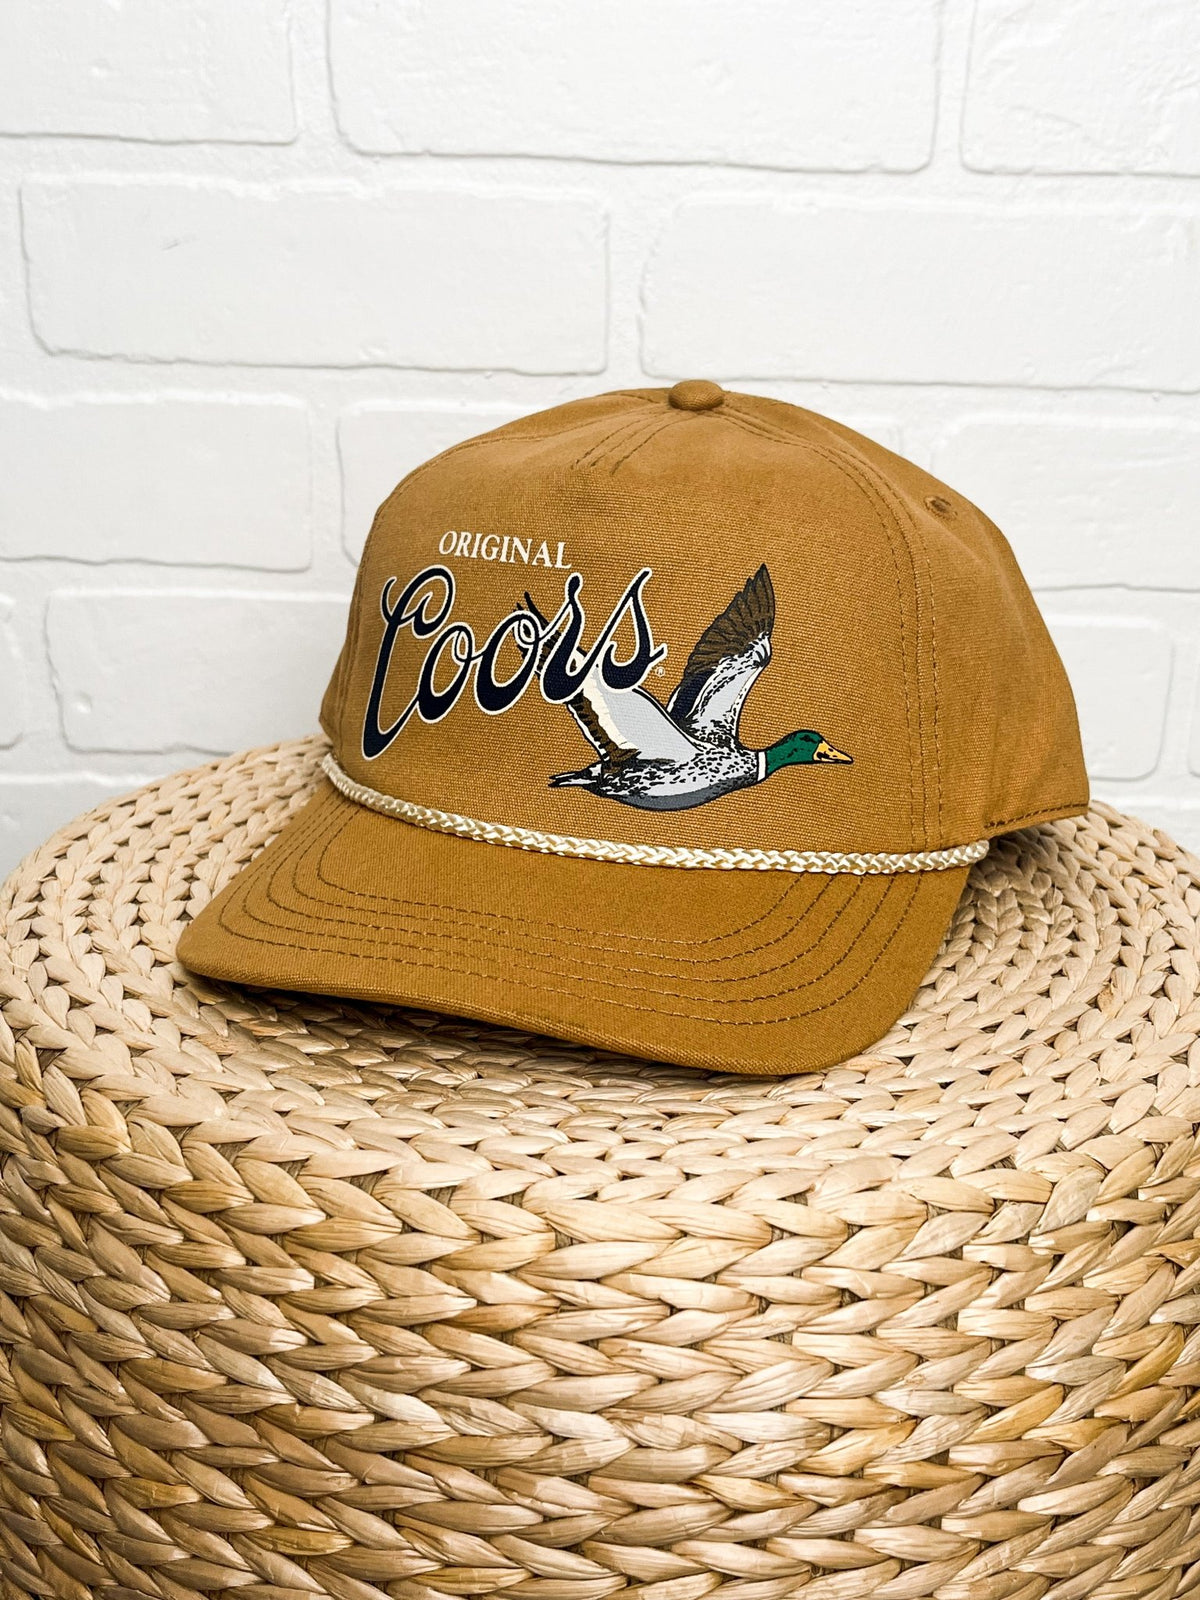 Coors original hat wheat - Trendy Gifts at Lush Fashion Lounge Boutique in Oklahoma City